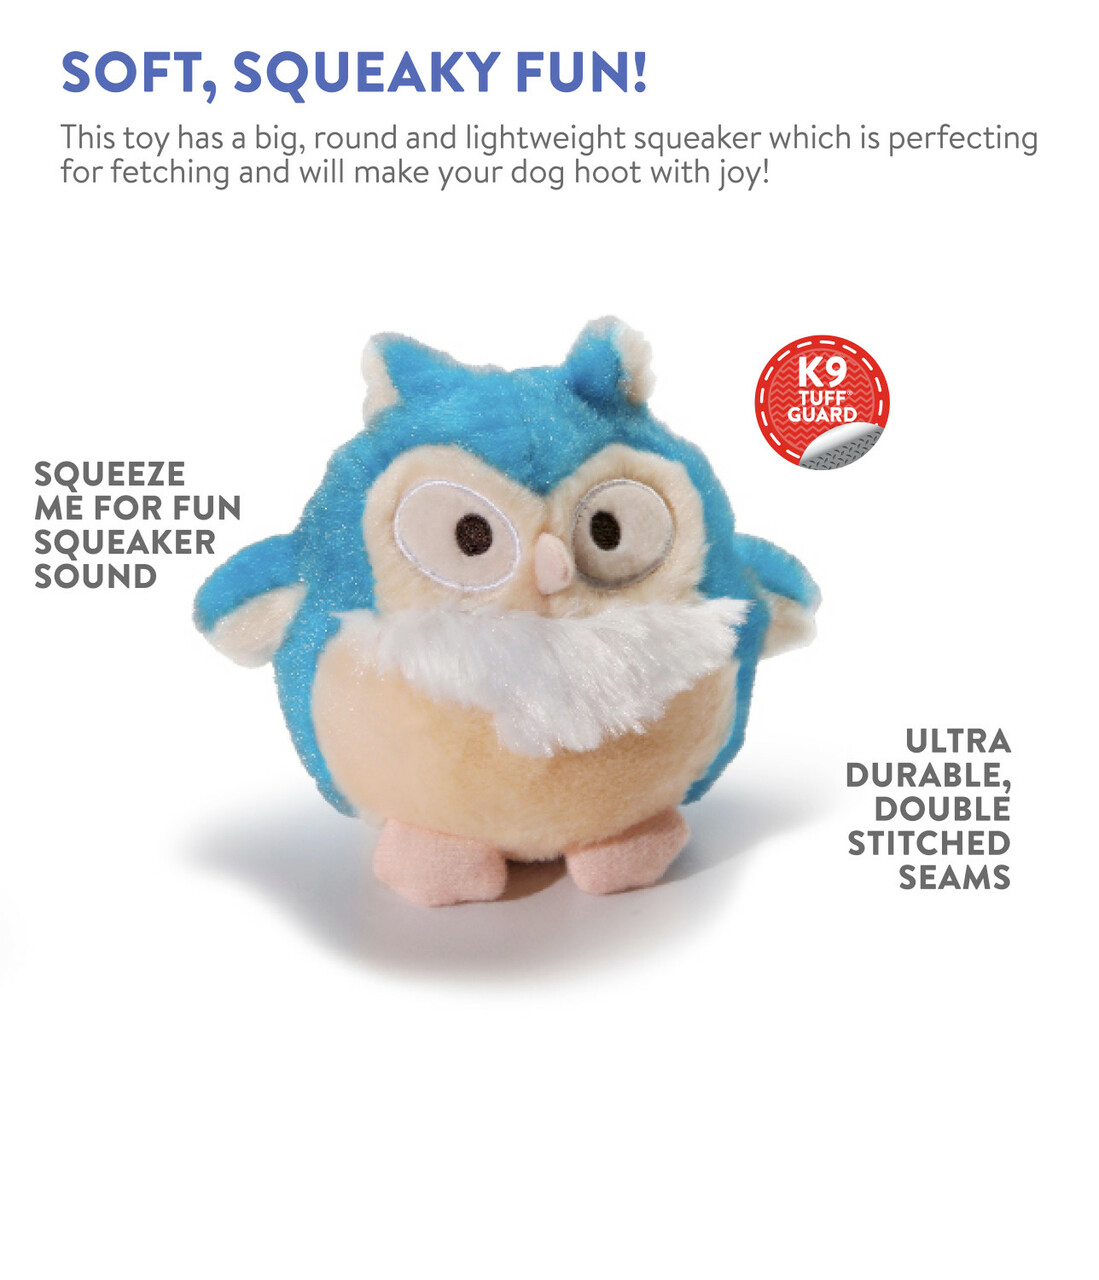 Howling Hoots Owl Dog Squeaky Plush Toy, Blue